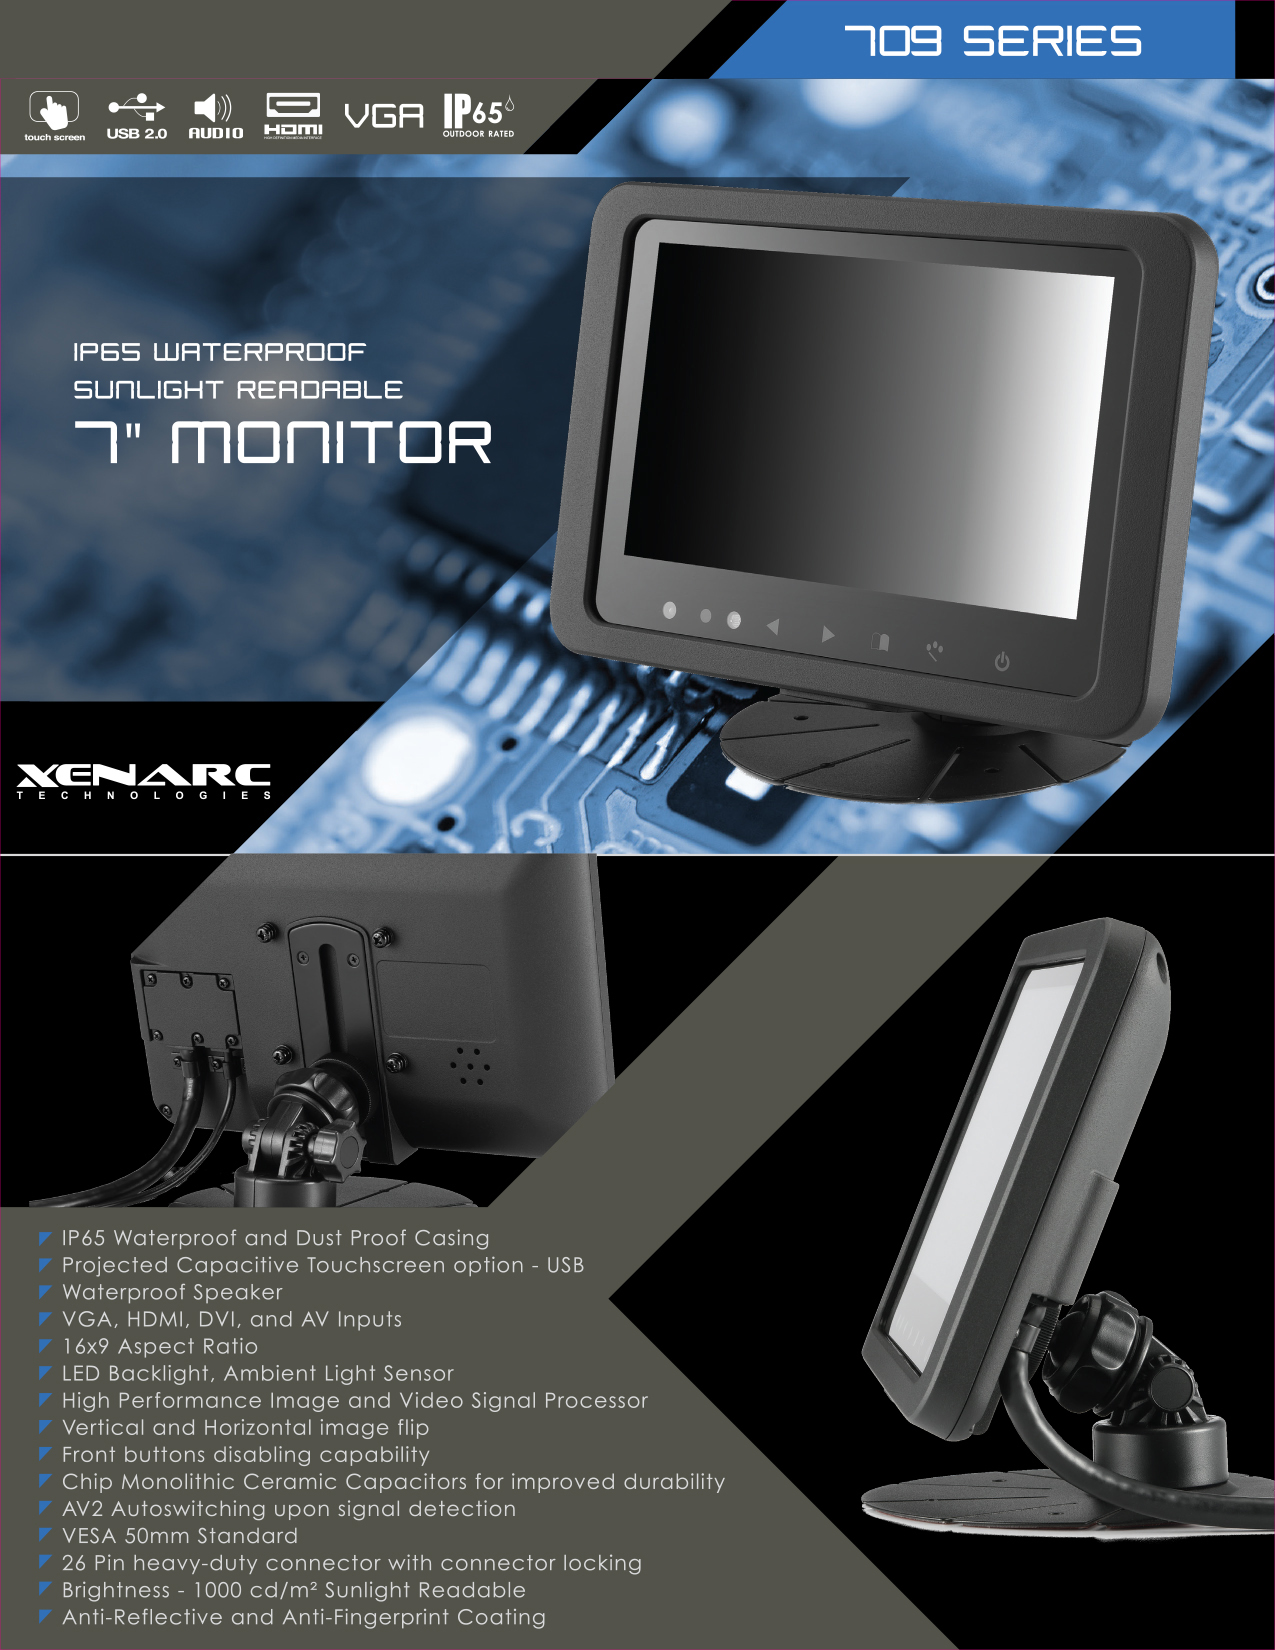 The Best Small Monitor and Small Touchscreen Solutions For Small Projects And Small Spaces Rugged Small LCD Touchscreen Monitor Solutions for All Industries - 7", 8", 9", 10",12",15",18" https://www.xenarc.com  Xenarc Technologies manufactures the best 7",8",9",10",12",15",18",24" Touchscreen Solutions for all industries and are tested and certified according to our customers requirements and according to their industry specifications.  Xenarc's are built to work anywhere and build to last. MTBF(Mean Time Between Failures) of a Xenarc is 55,000 hour of continuous operation or 6.2 years.    touchscreen, touchscreen monitor, small touchscreen, small monitor, 10” touchscreen, 7” touchscreen,10” monitor, 7” monitor, LCD Monitor, touch screen, touch screen monitor, touchscreen manufacturer, monitor manufacturer, touchscreen solutions manufacurer https://www.xenarc.com